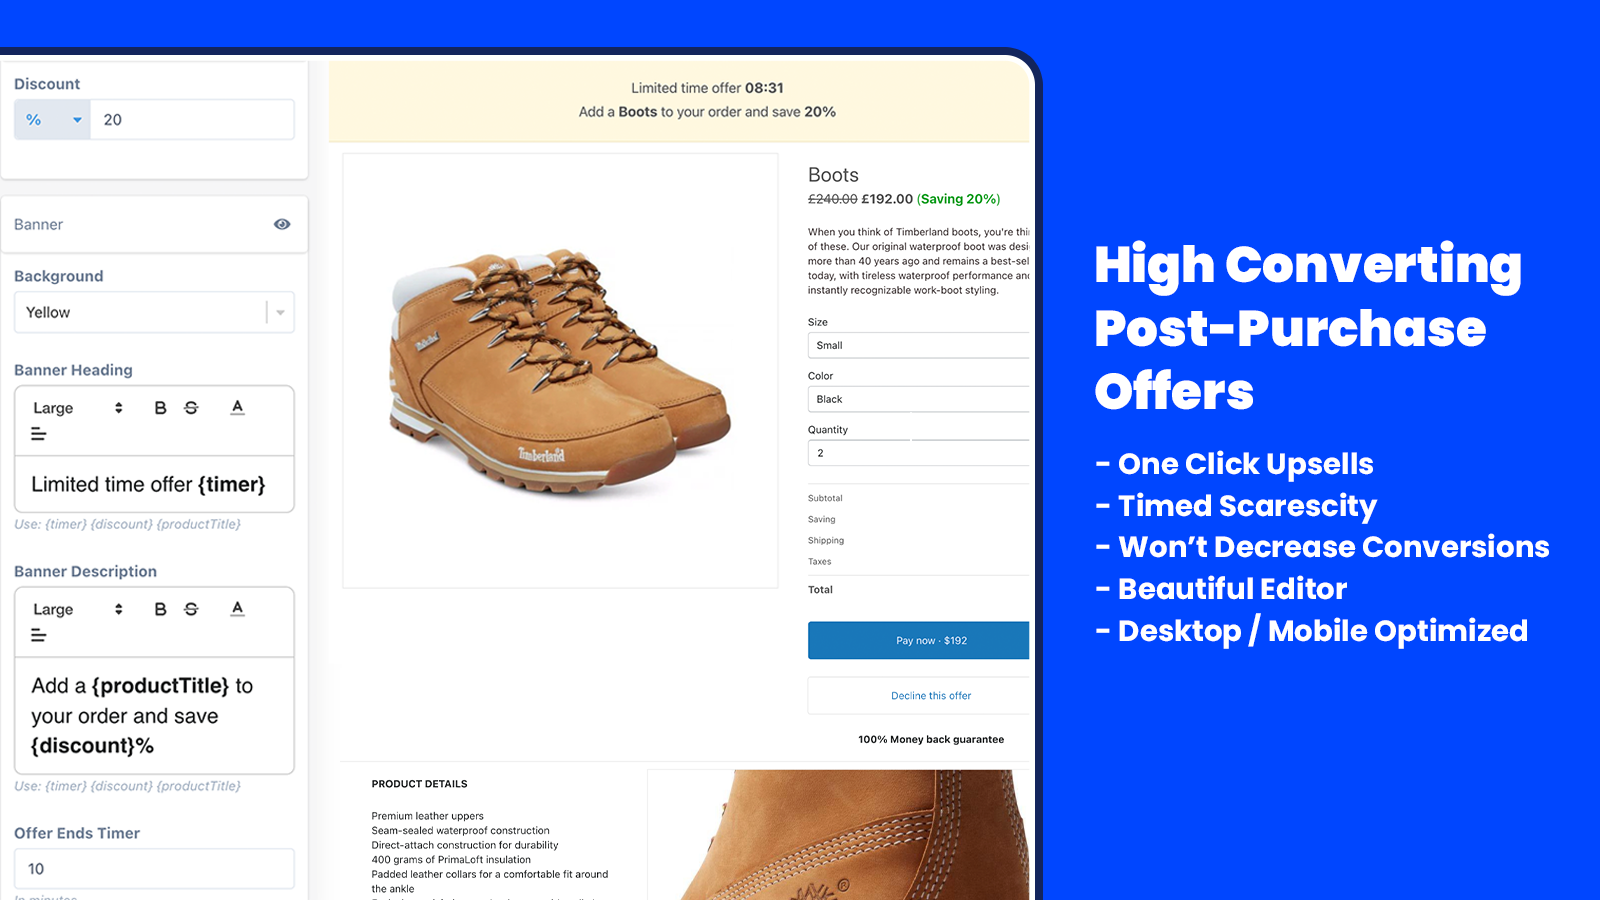 High Converting Post-Purchase Offers